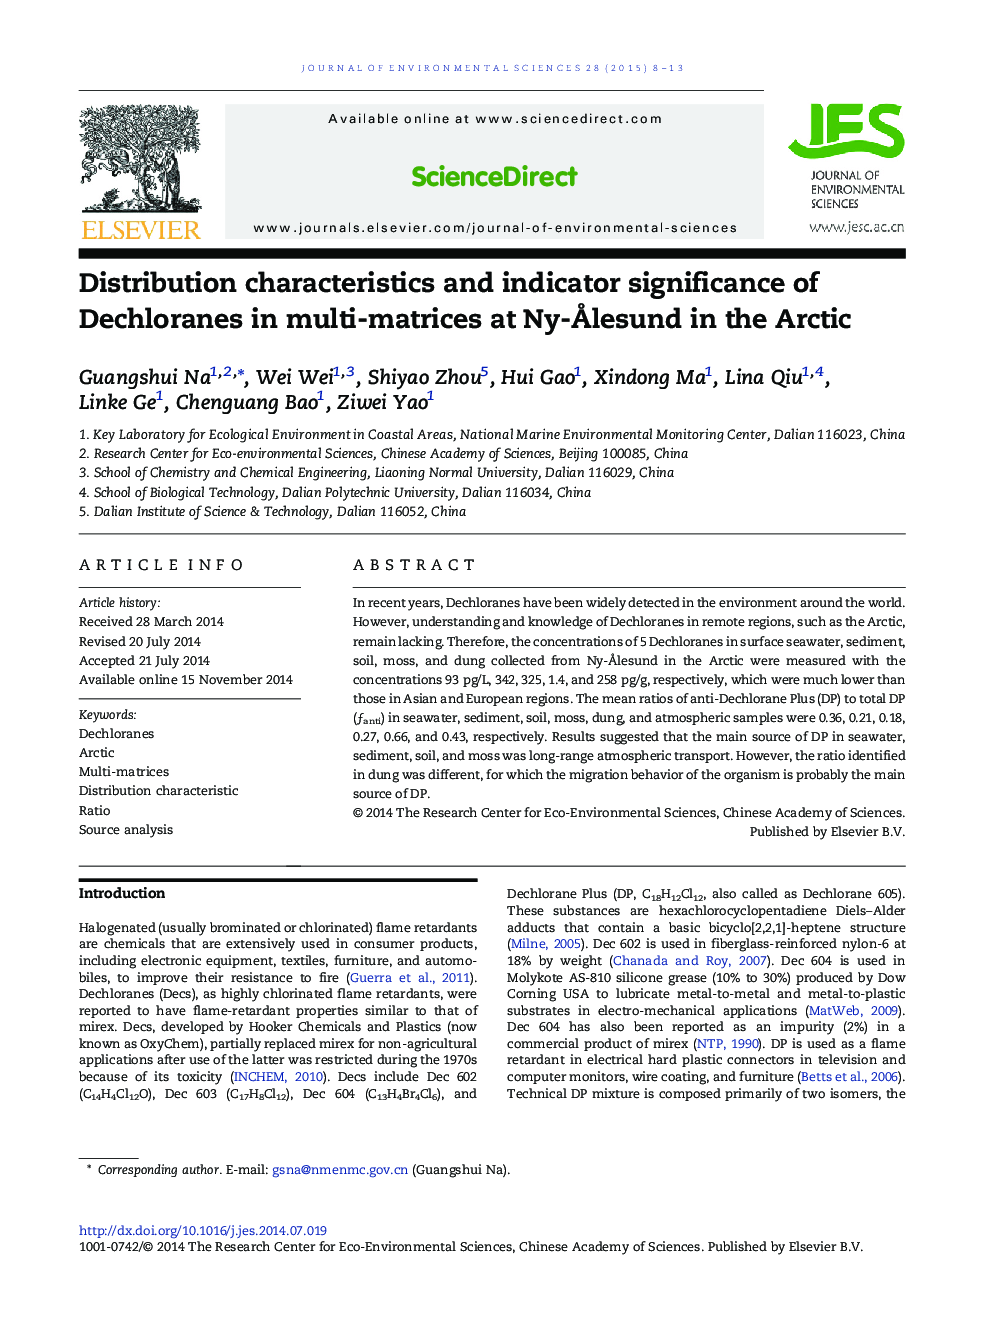 Distribution characteristics and indicator significance of Dechloranes in multi-matrices at Ny-Ålesund in the Arctic